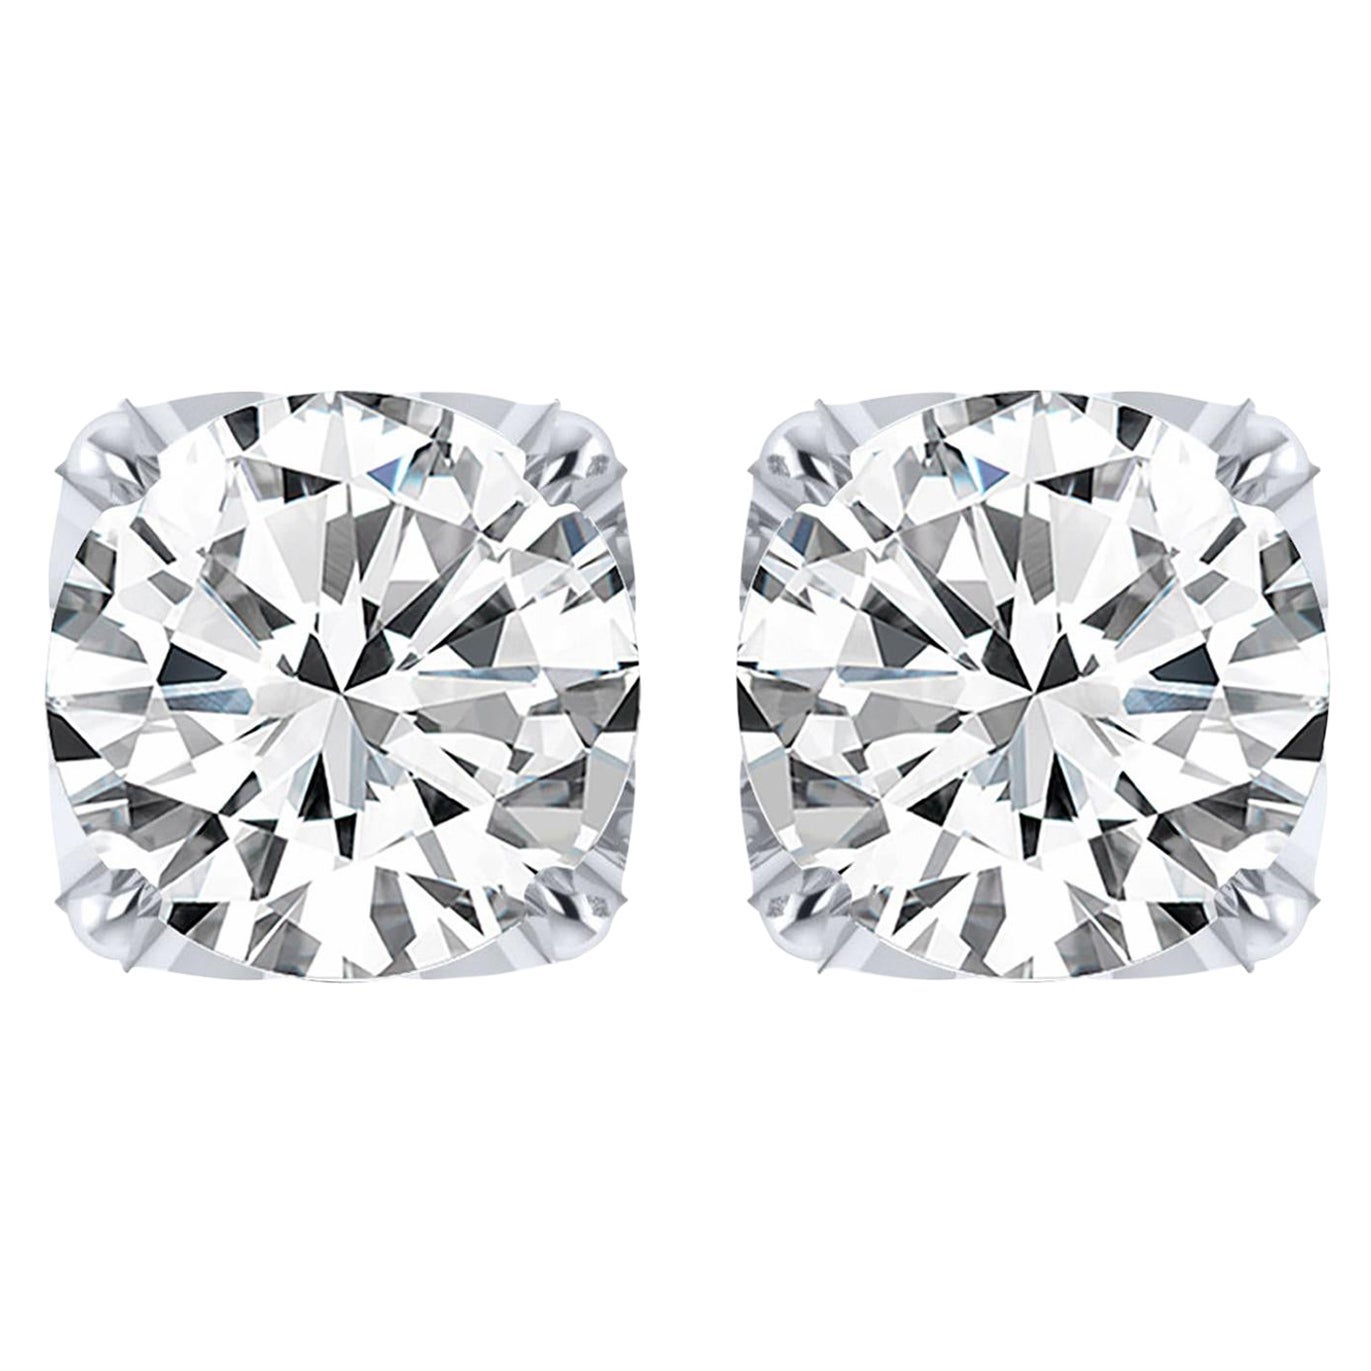 Louis Vuitton - Authenticated Star Blossom Earrings - White Gold Silver for Women, Never Worn